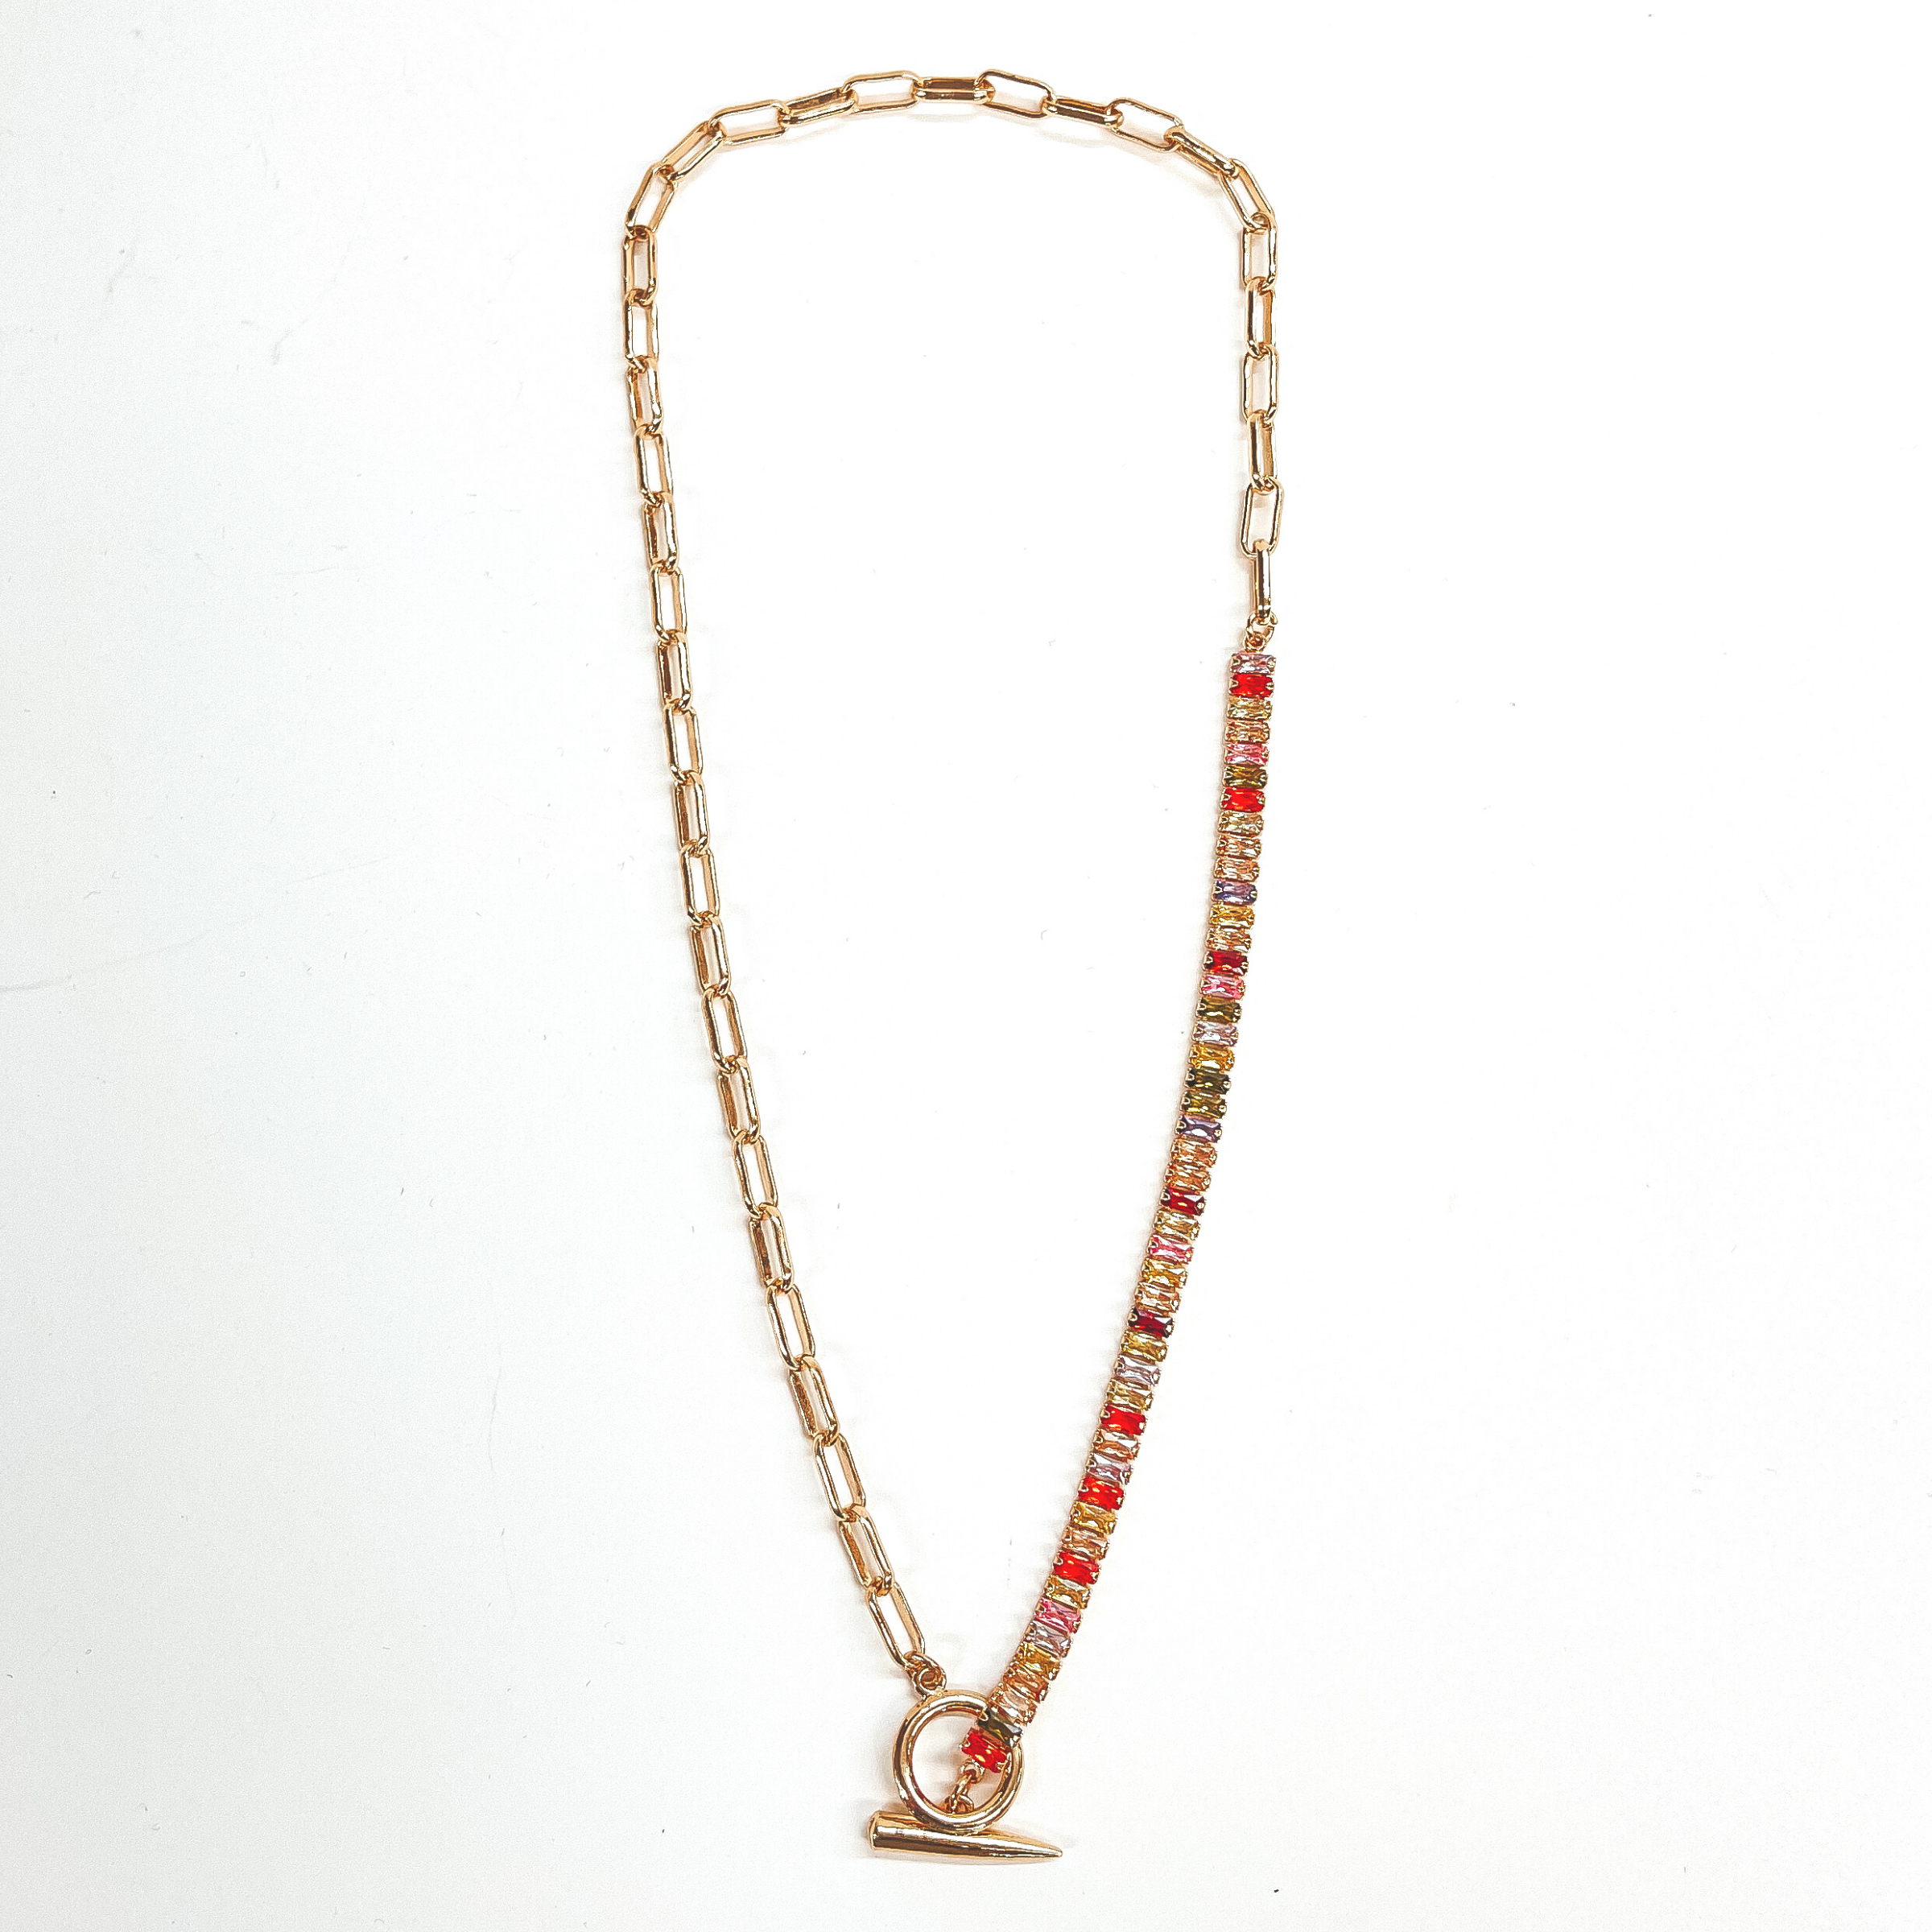 This gold necklace is half multicolored rhinestones  and half paperclip chain. The multicolored  rhinestones are orange, red, yellow, light pink, green,  purple, and champagne. There is also a  front toggle clasp. This necklace is pictured on a  white background.